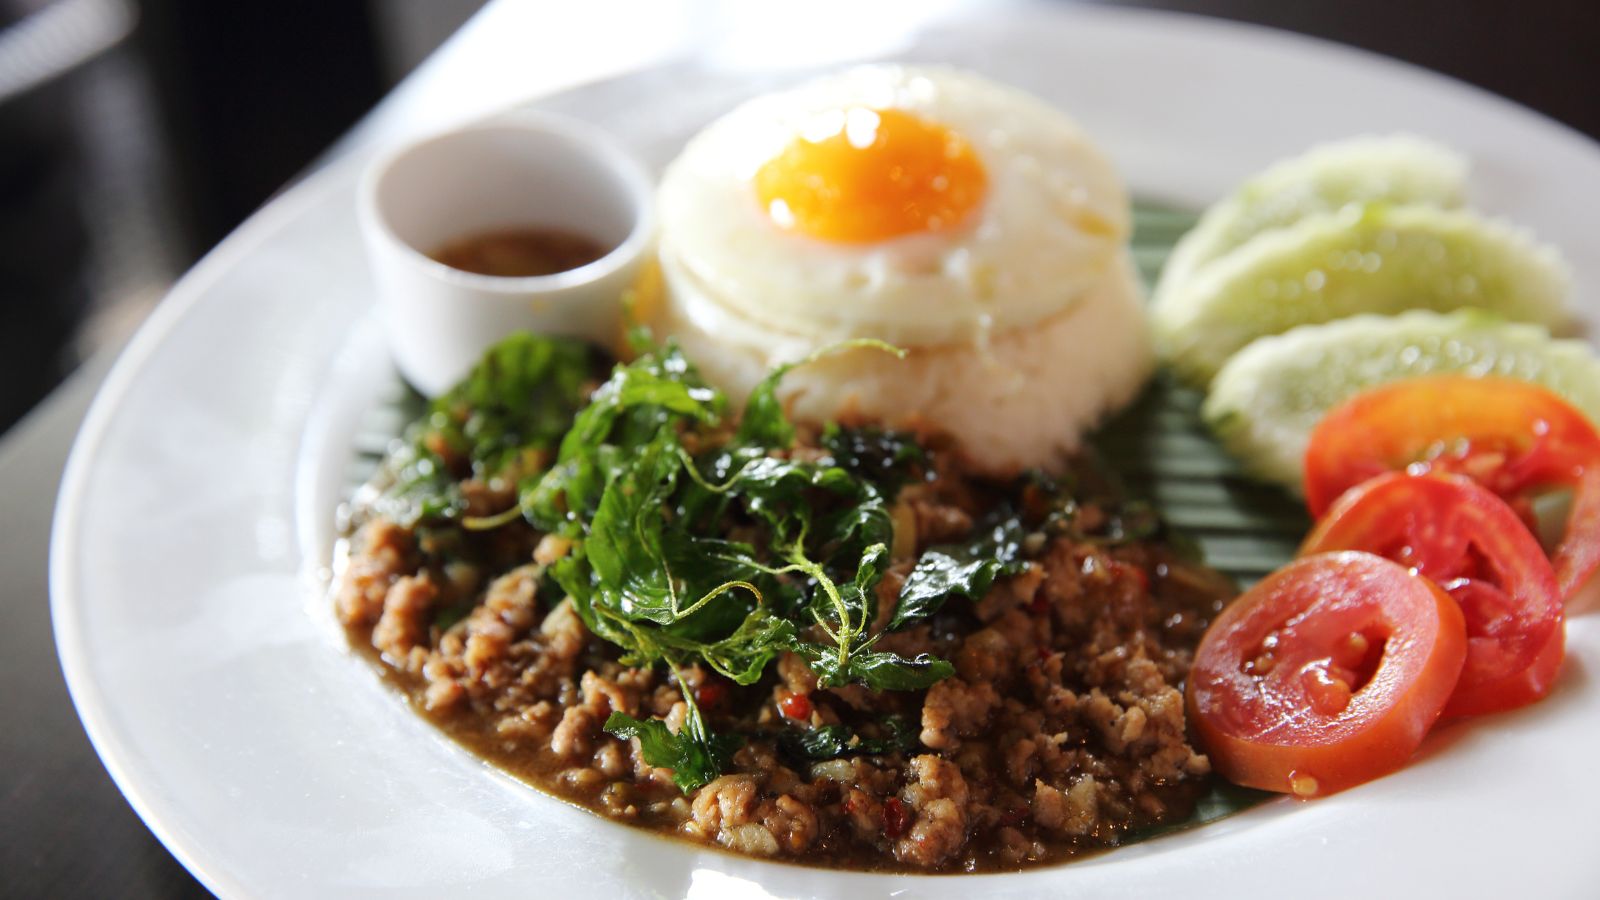 Rice with stir-fried pork and basil, topped with an egg.